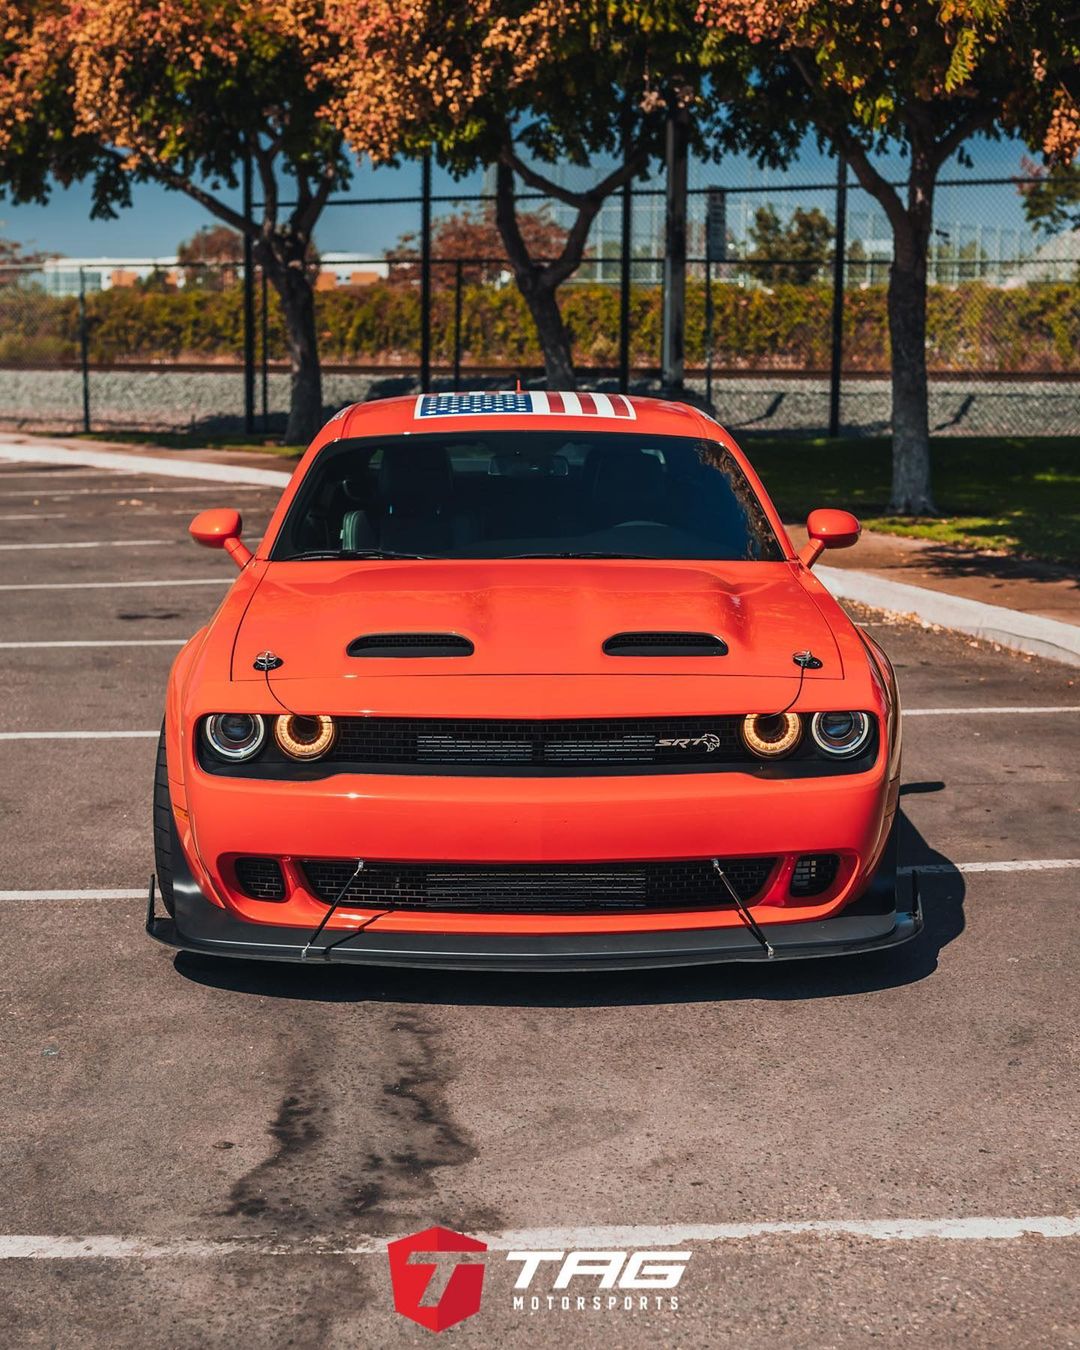 https://s1.cdn.autoevolution.com/images/news/modern-general-lee-is-a-dodge-challenger-hellcat-with-the-new-flag-153236_1.jpg